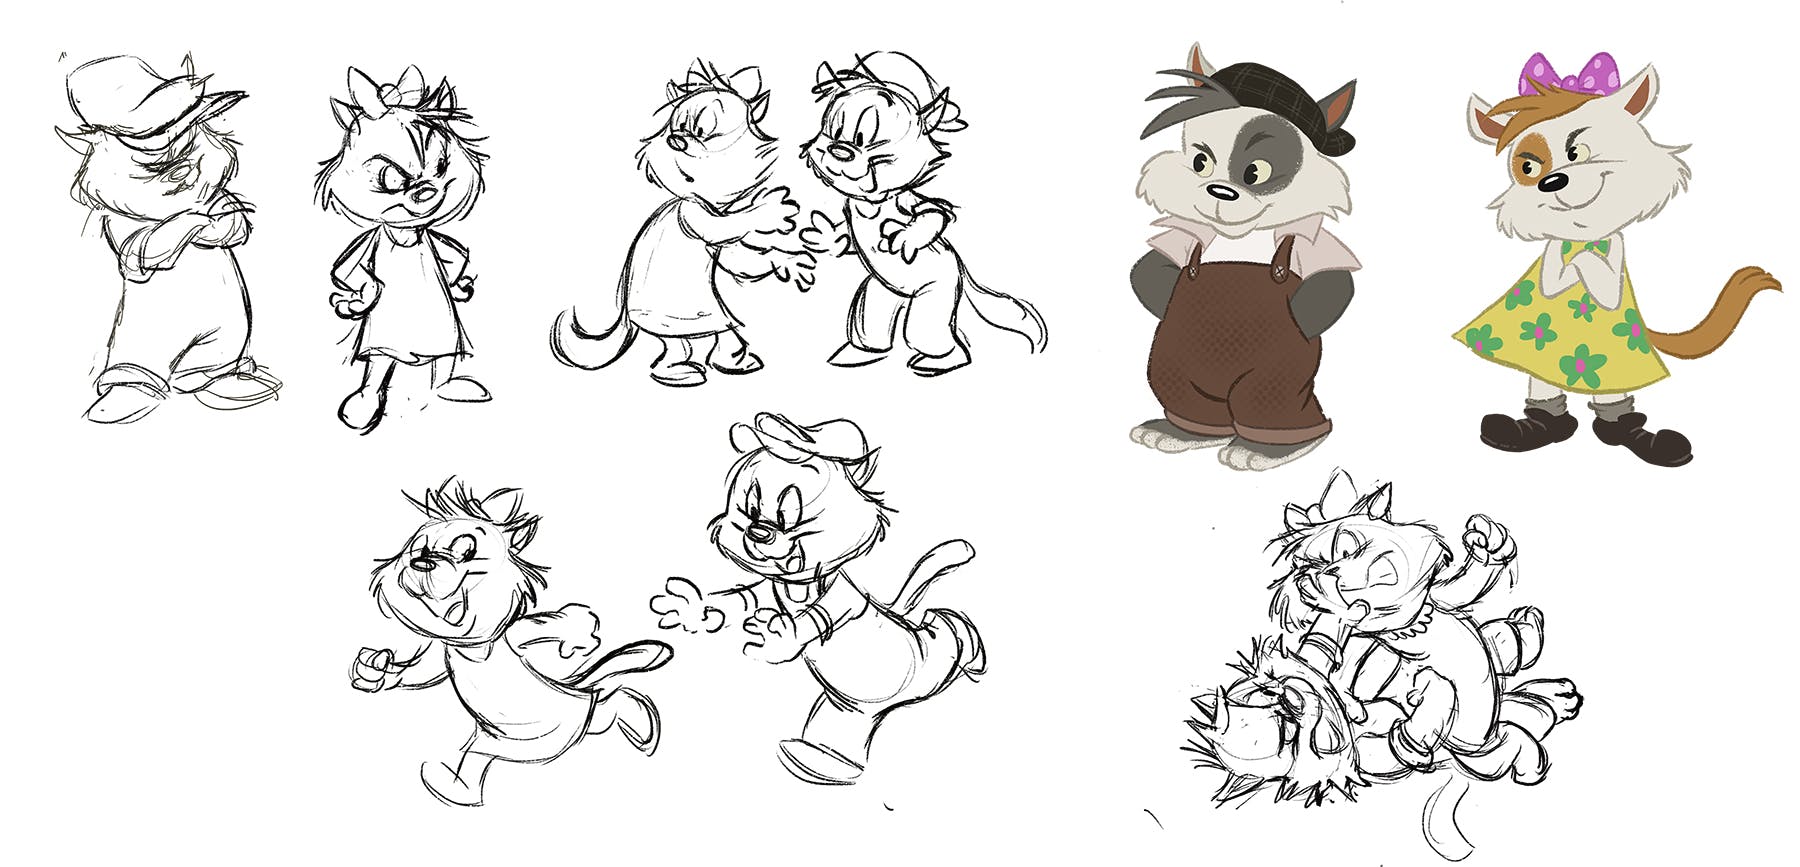 Concept sketches of a male and female cat